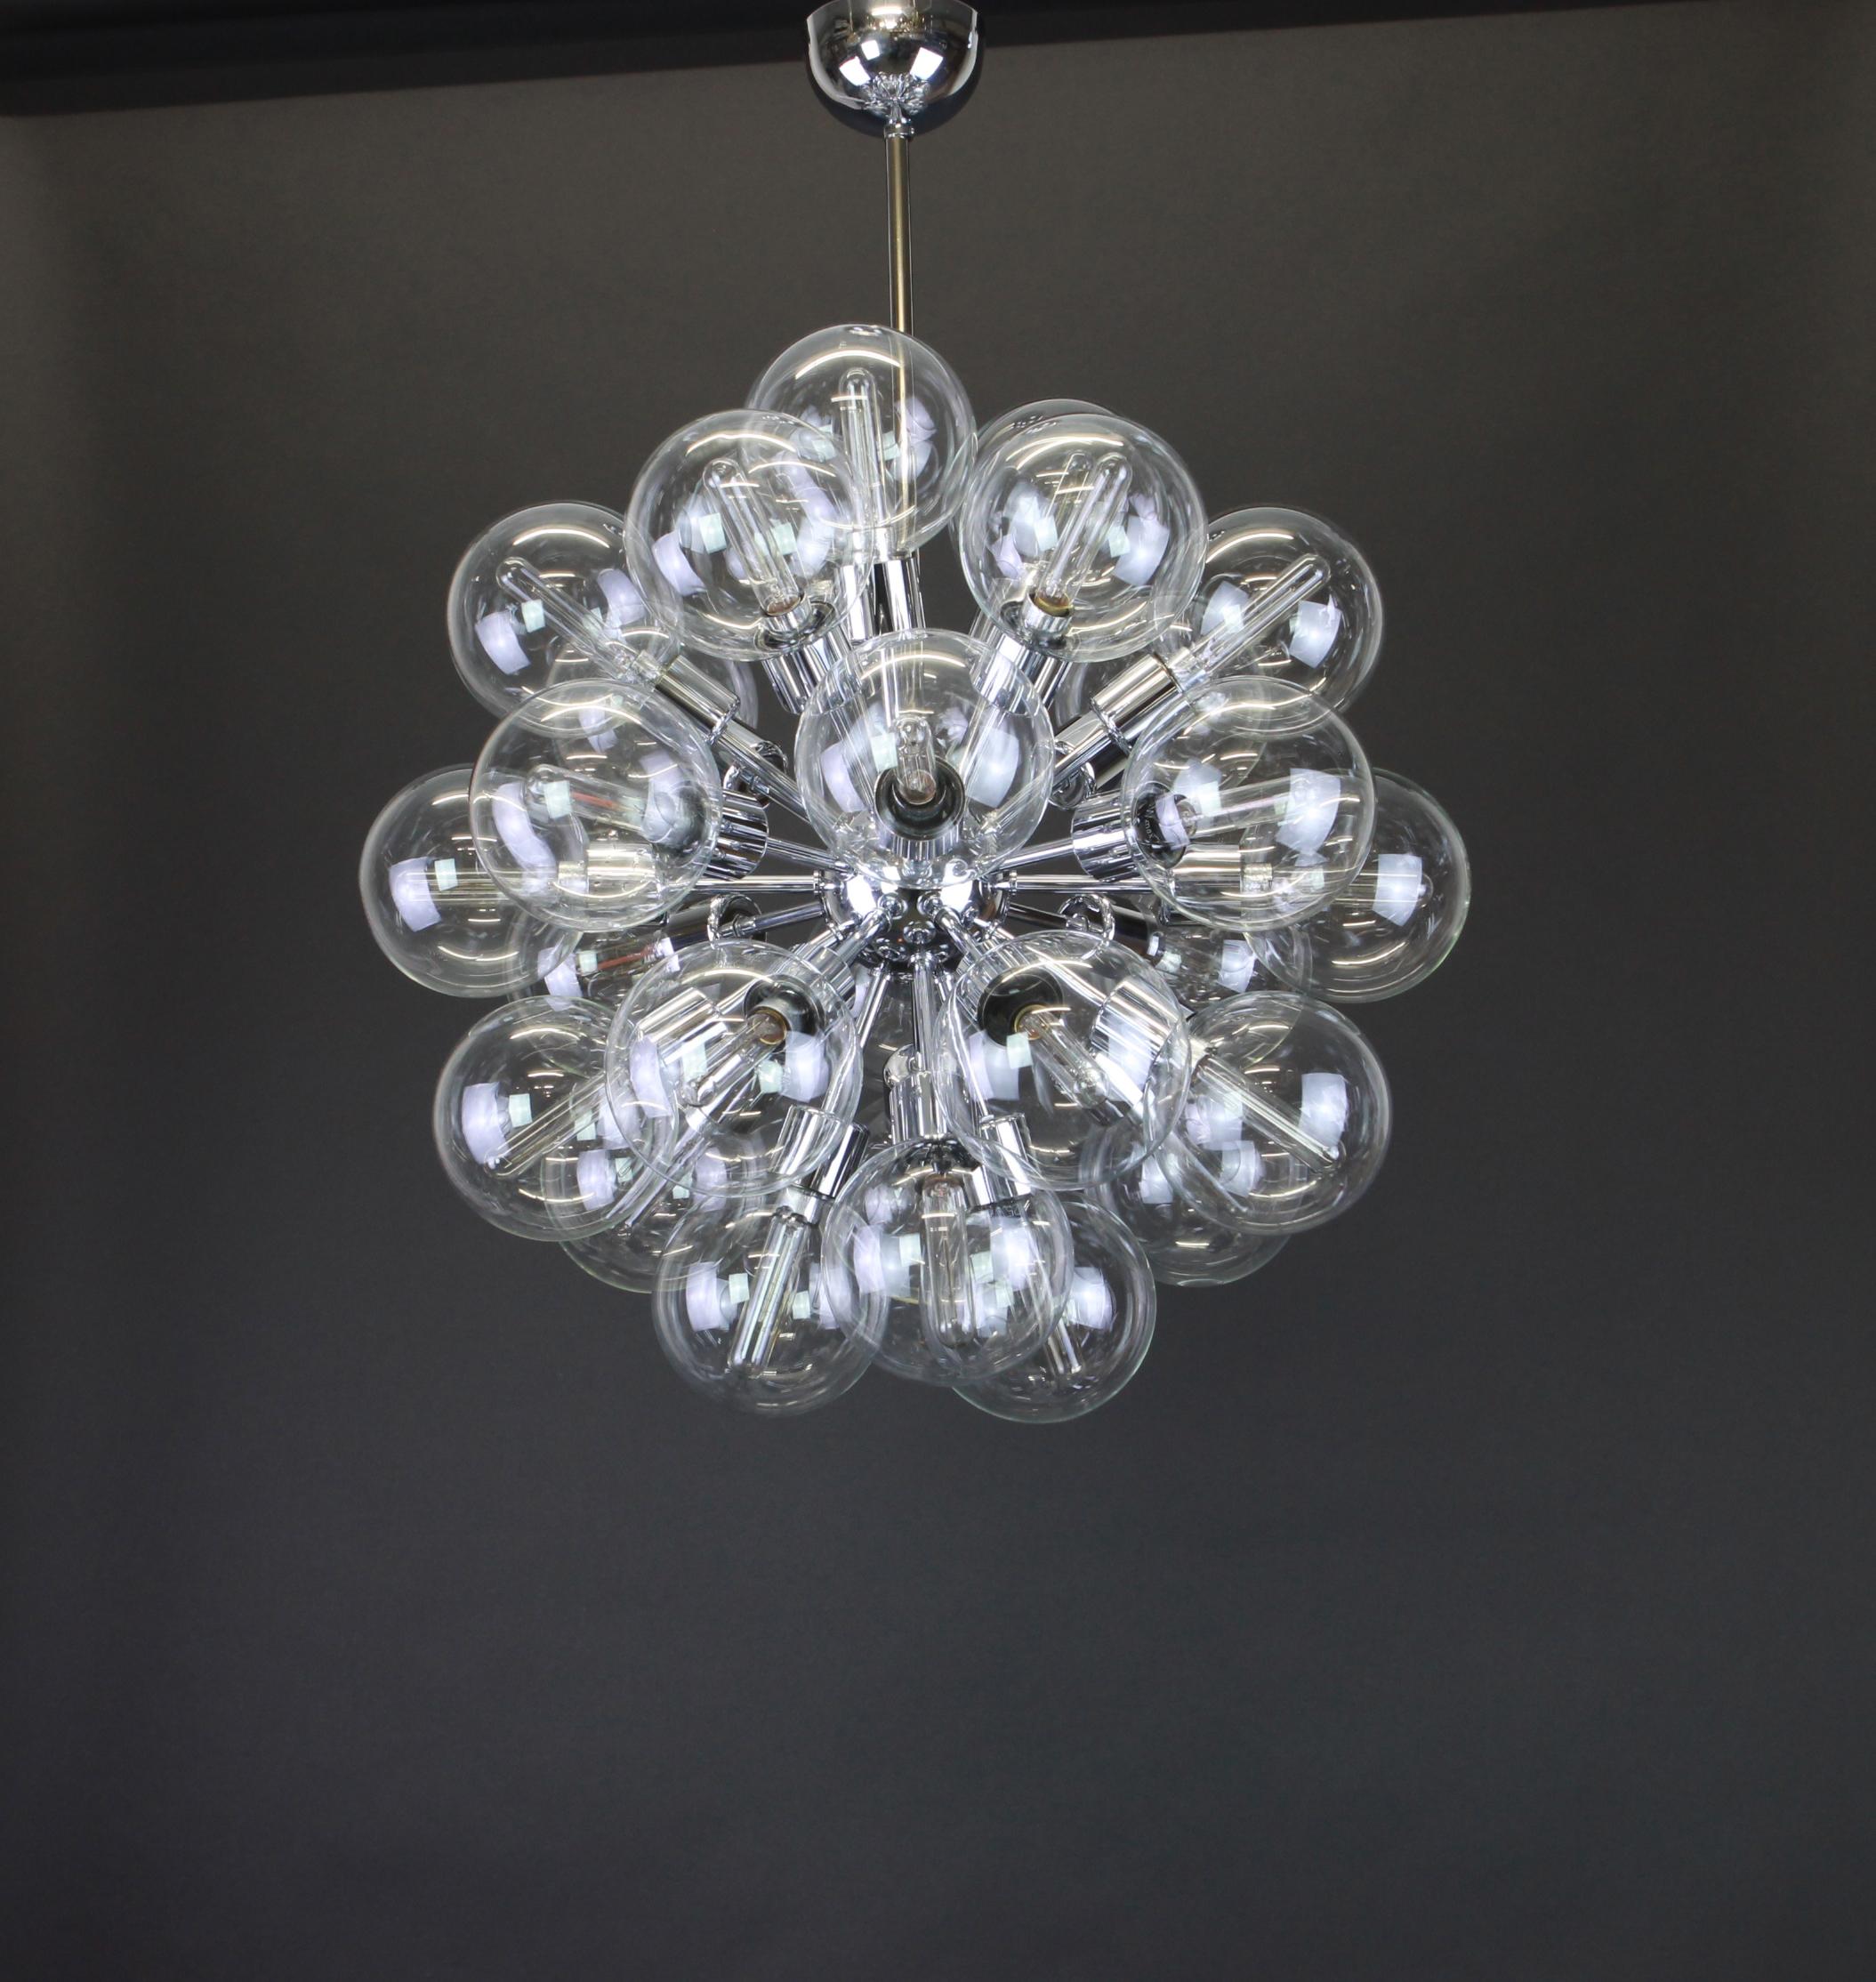 Beautiful large starburst chrome chandelier designed by Motoko Ishii for Staff Leuchten, manufactured in Germany, circa 1960s.
It features a chrome frame with (28) transparent blown glass globes surrounding the frame creating a spectacular Sputnik